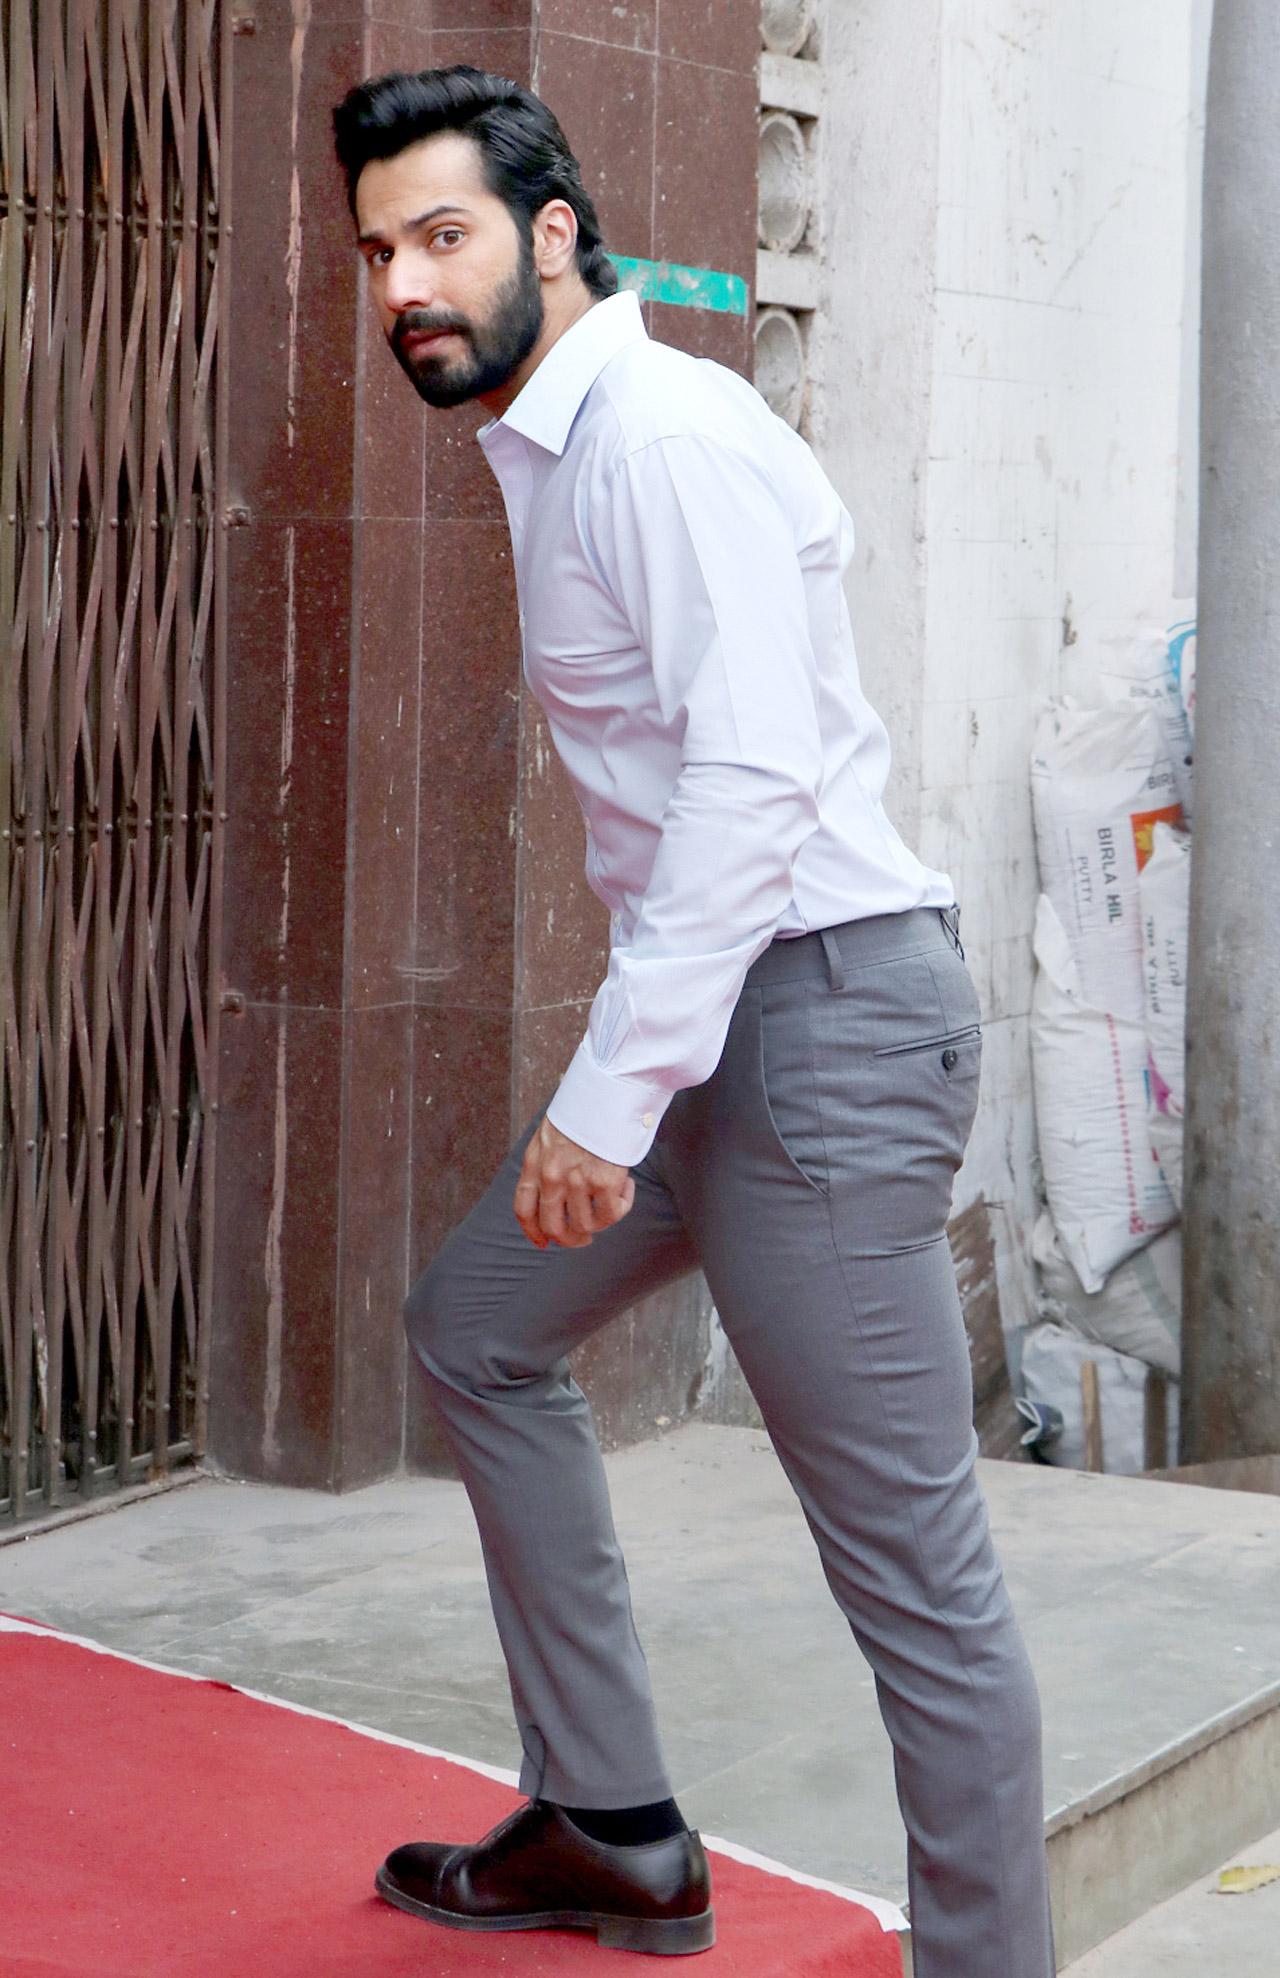 Varun Dhawan was shooting in Filmcity, Goregaon when he was clicked by the paparazzi. The actor looked dapper in formals. Looks like, he was shooting for a commercial.